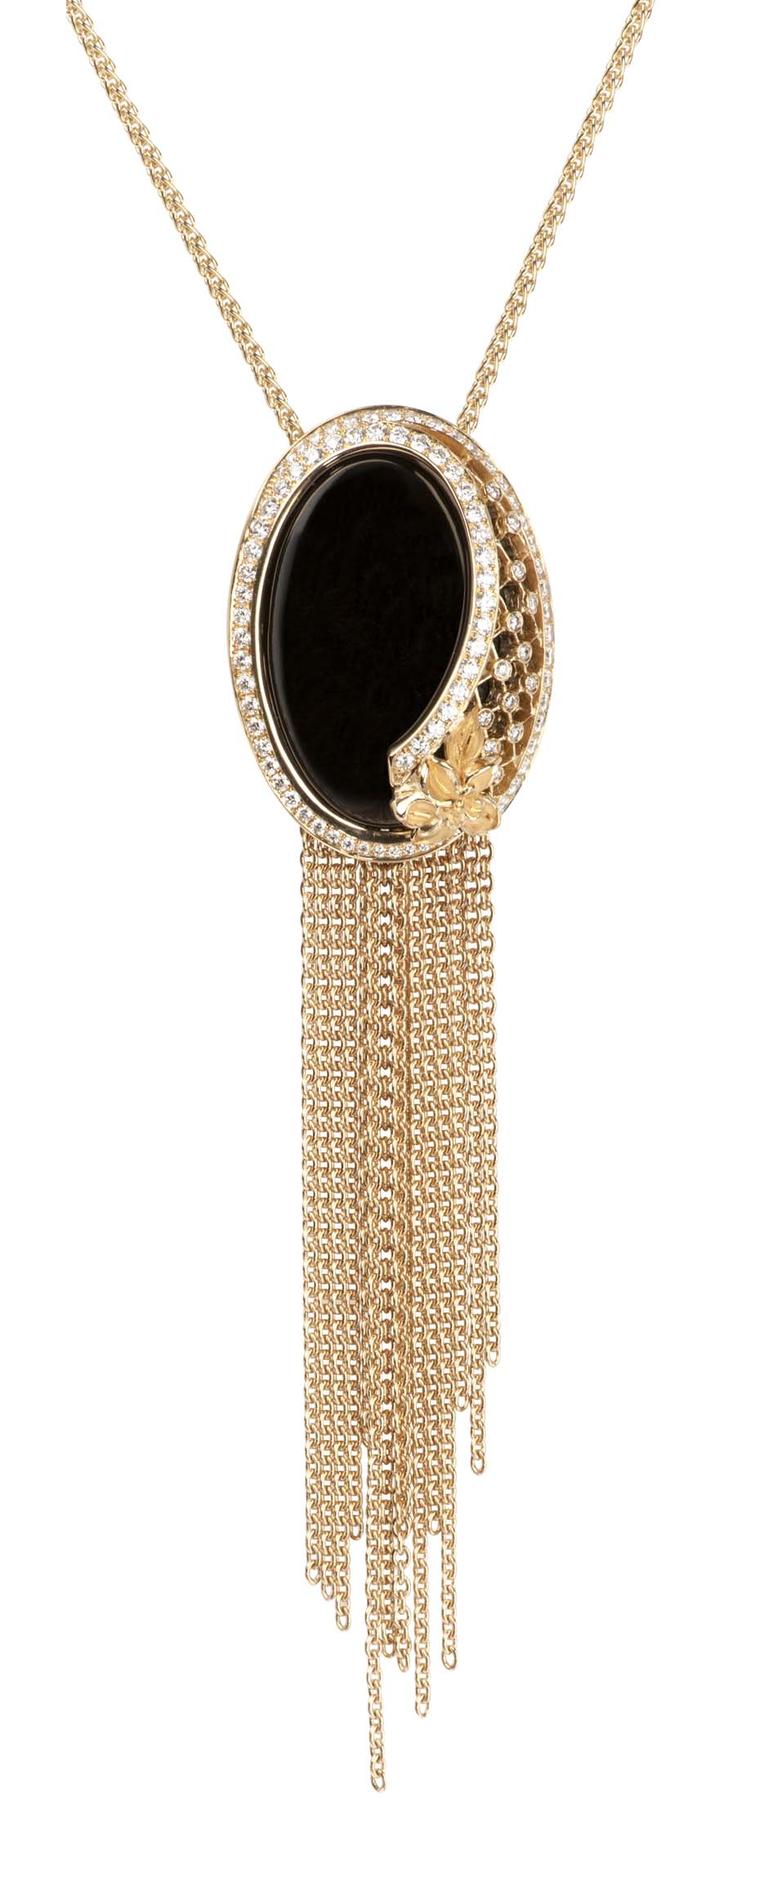 Carrera y Carrera Sierpes maxi necklace in yellow gold, onyx and diamonds.